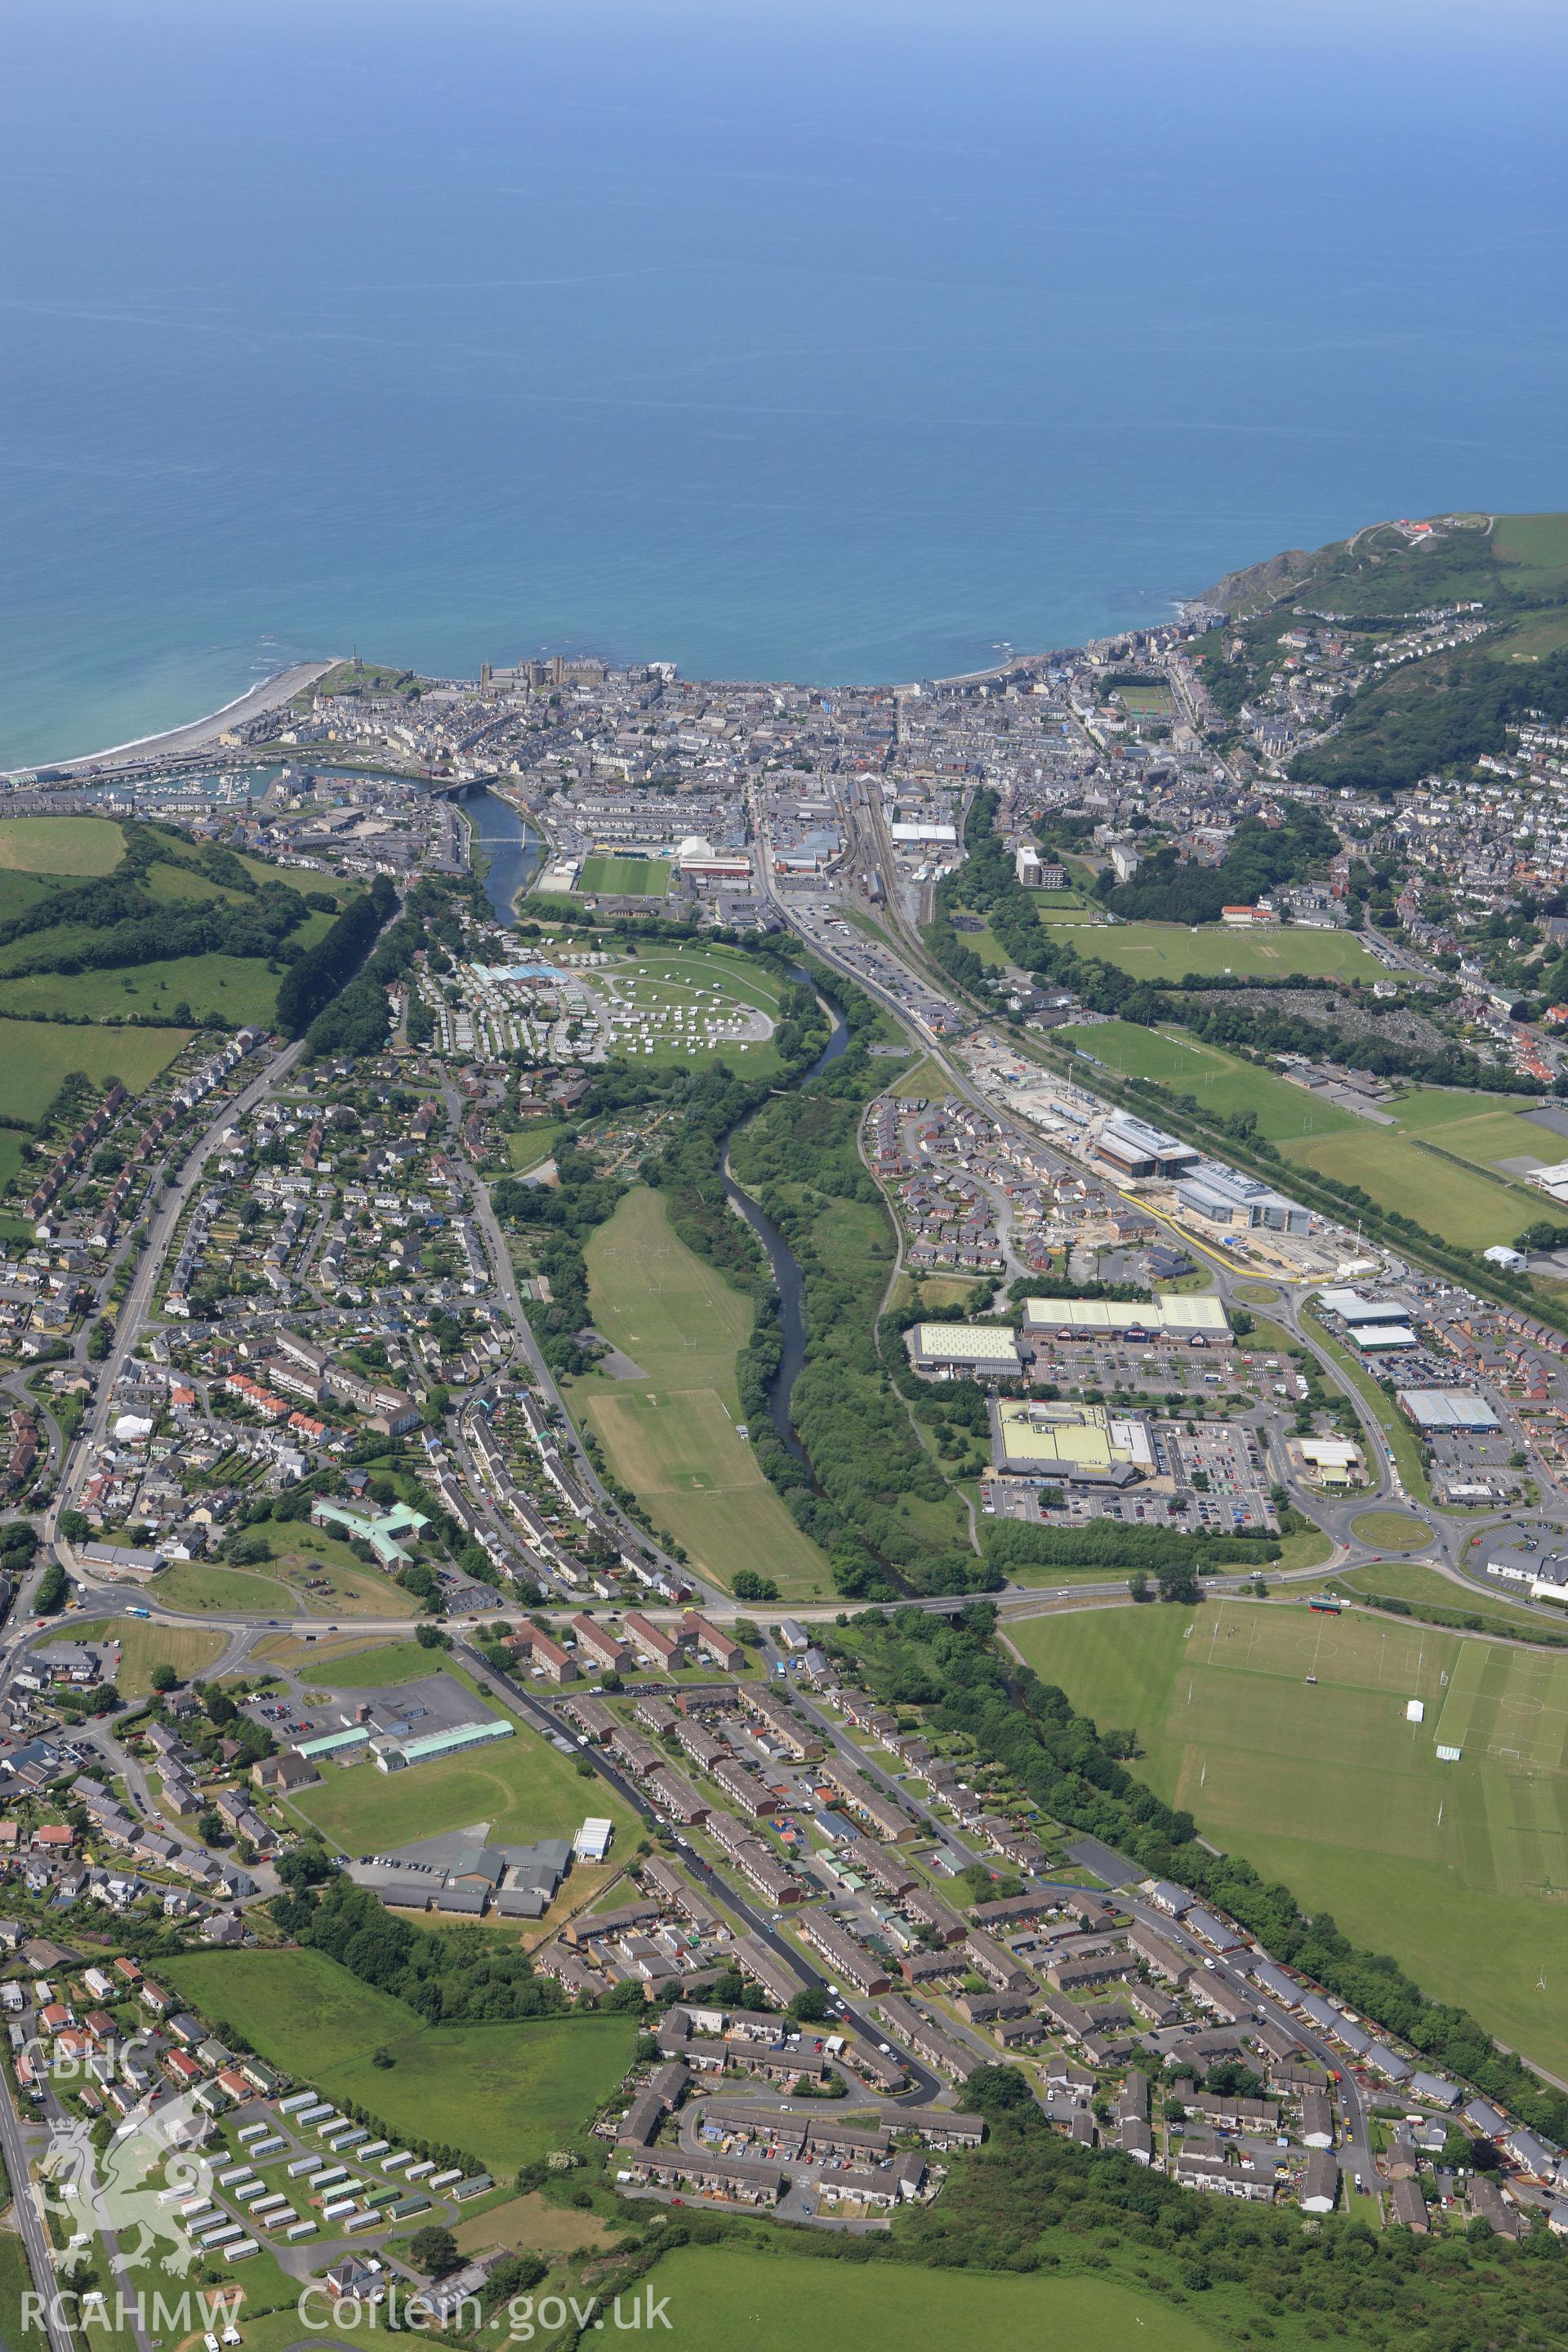 RCAHMW colour oblique aerial photograph of Aberystwyth. Taken on 16 June 2009 by Toby Driver